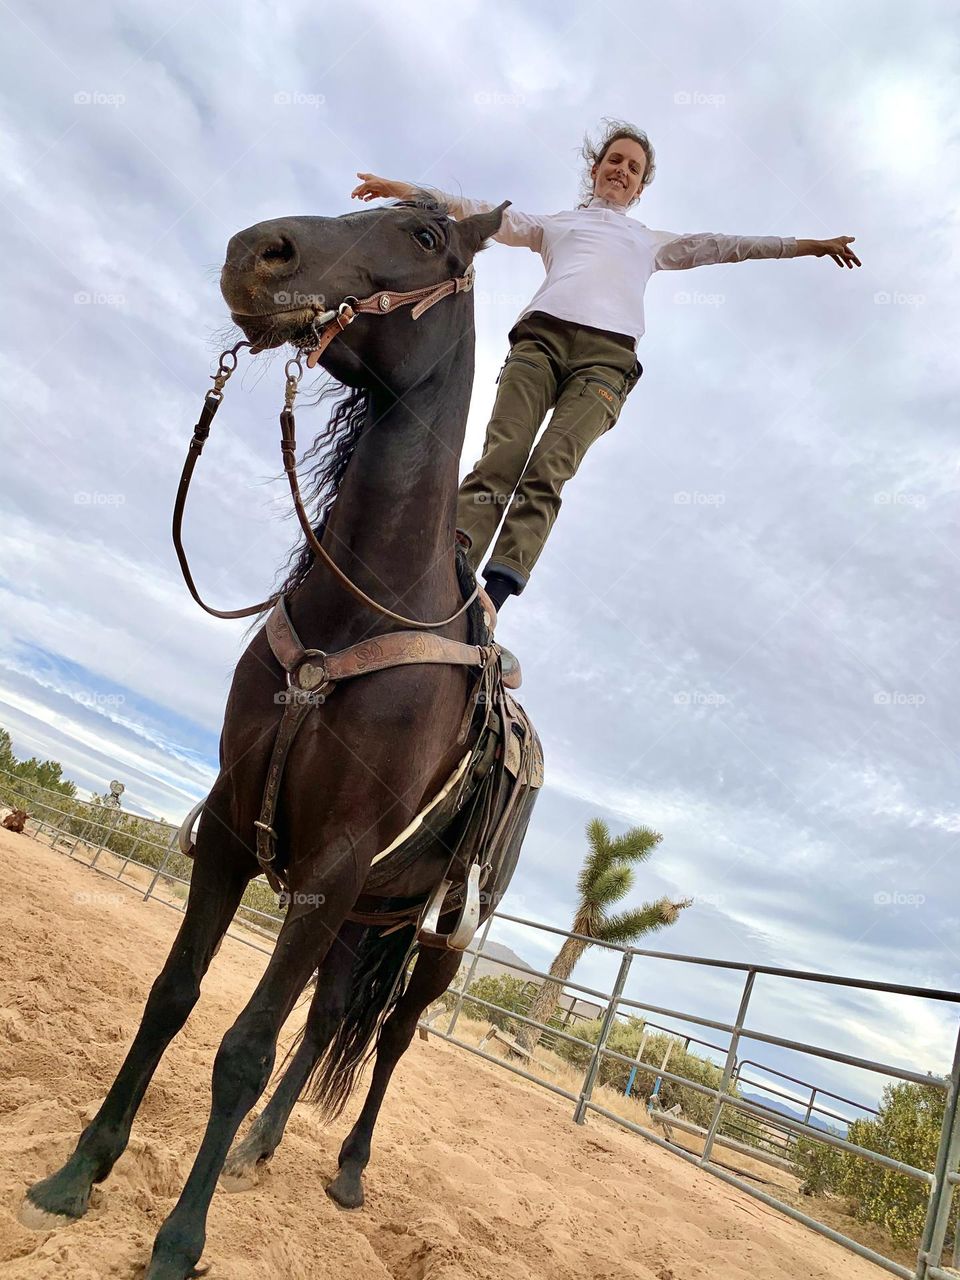 I’m on a horse!